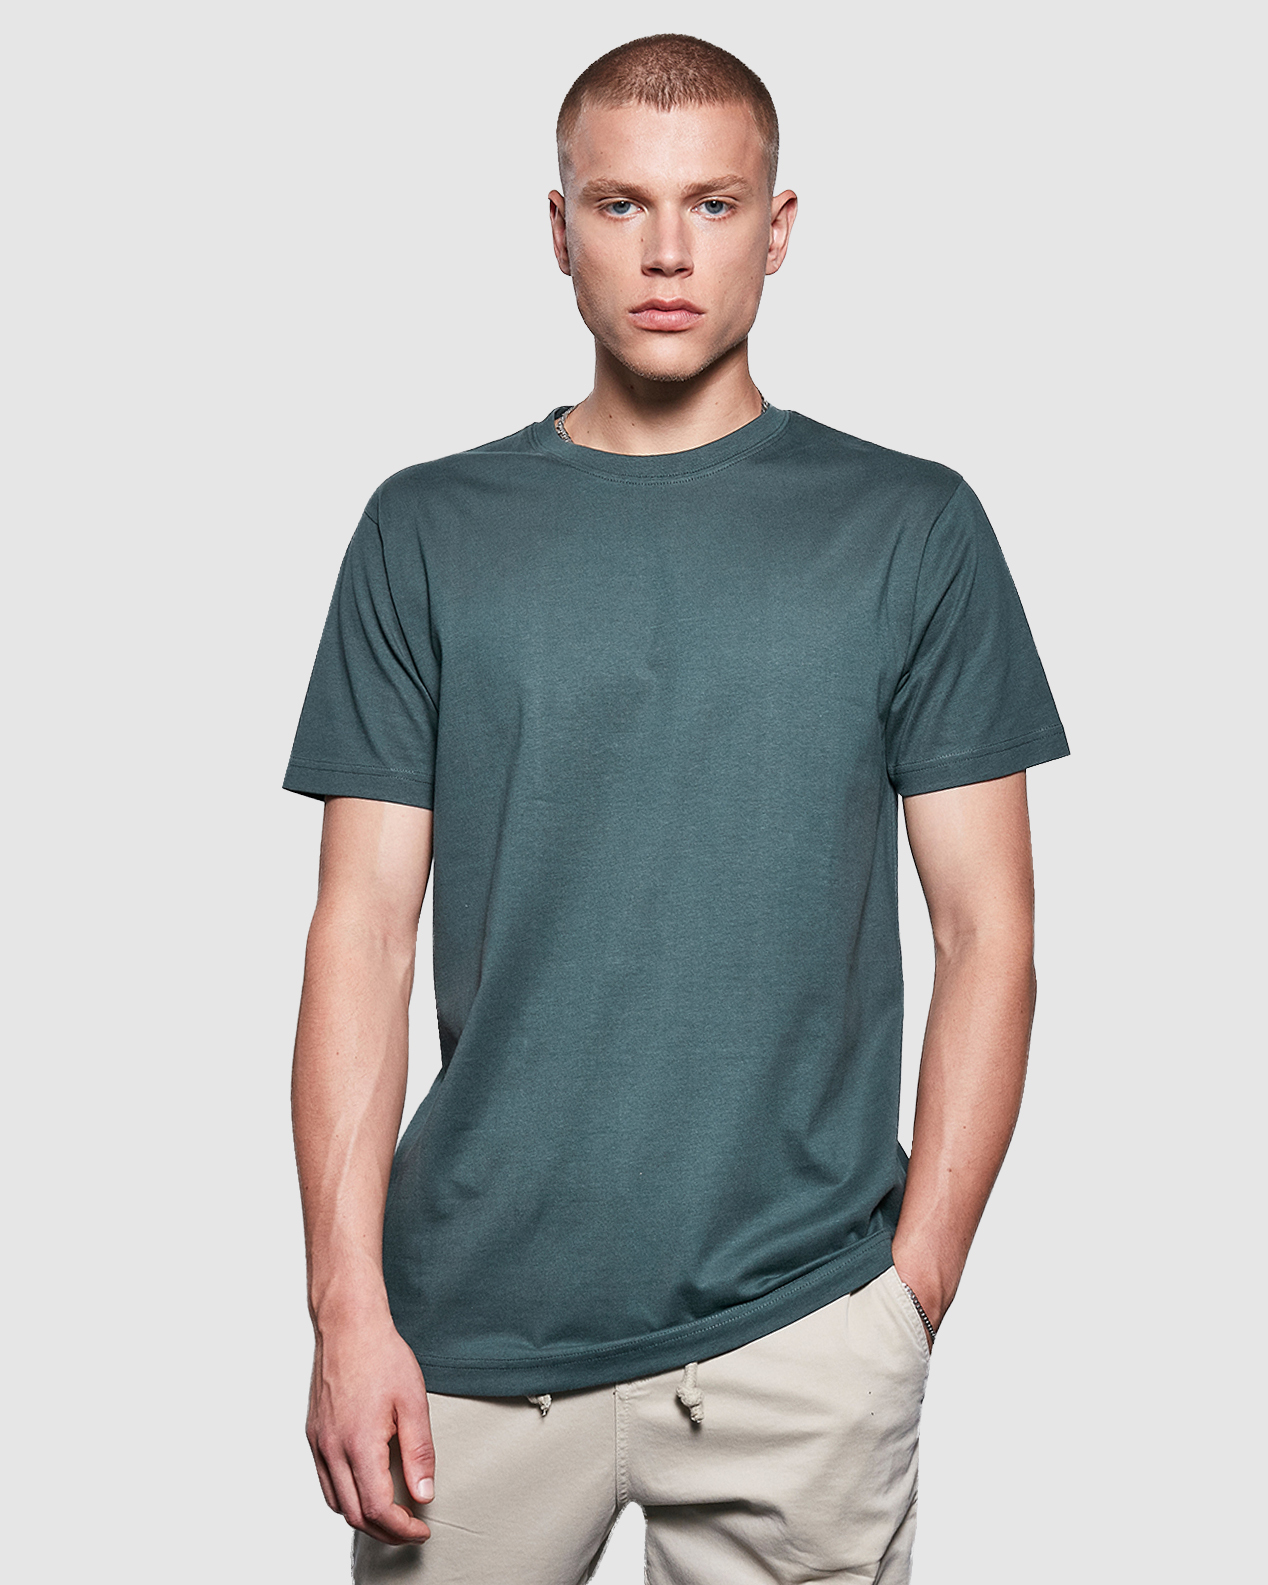 Men's Short Sleeved Cotton Tee Build Your Brand Round Neck T-Shirt BY004 